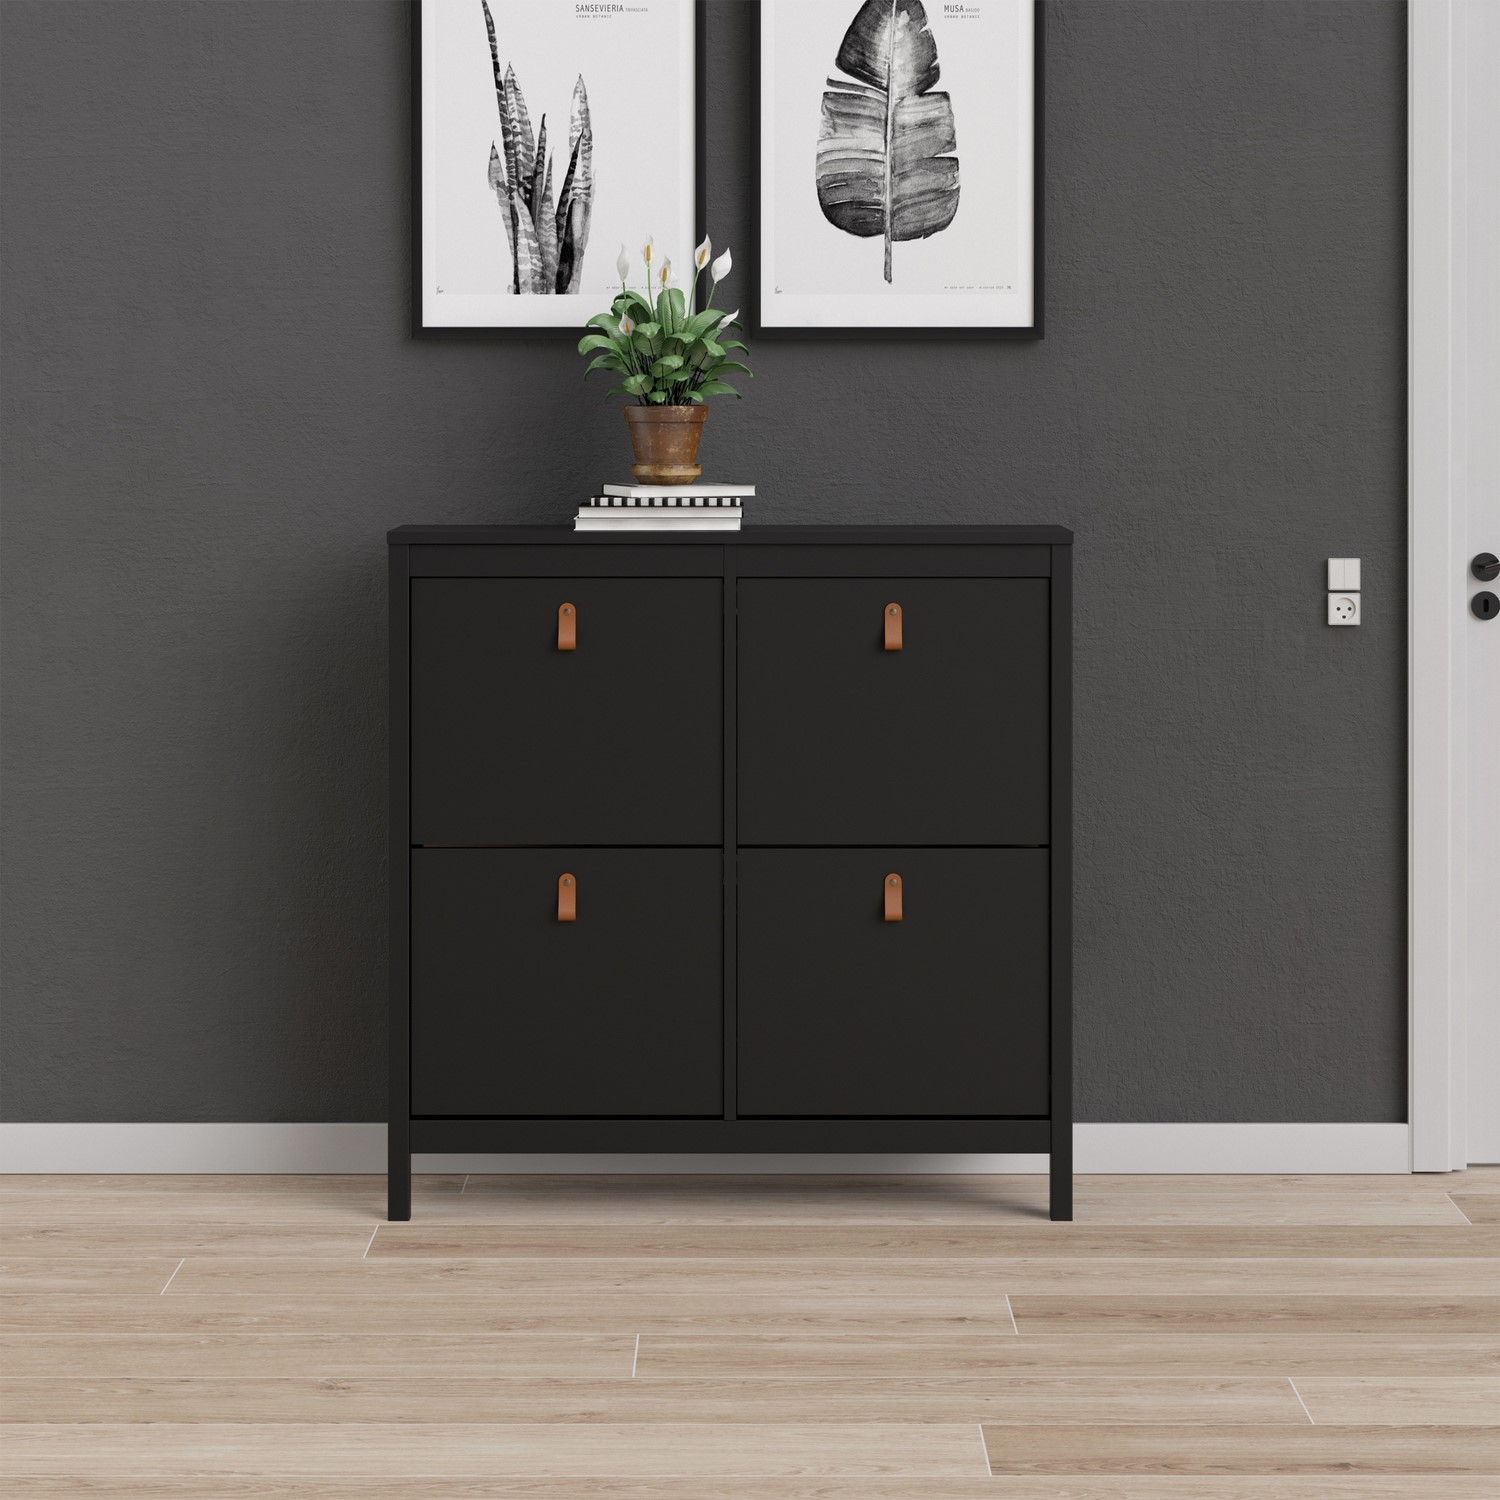 Photo of Black shoe cabinet with 4 compartments - barcelona